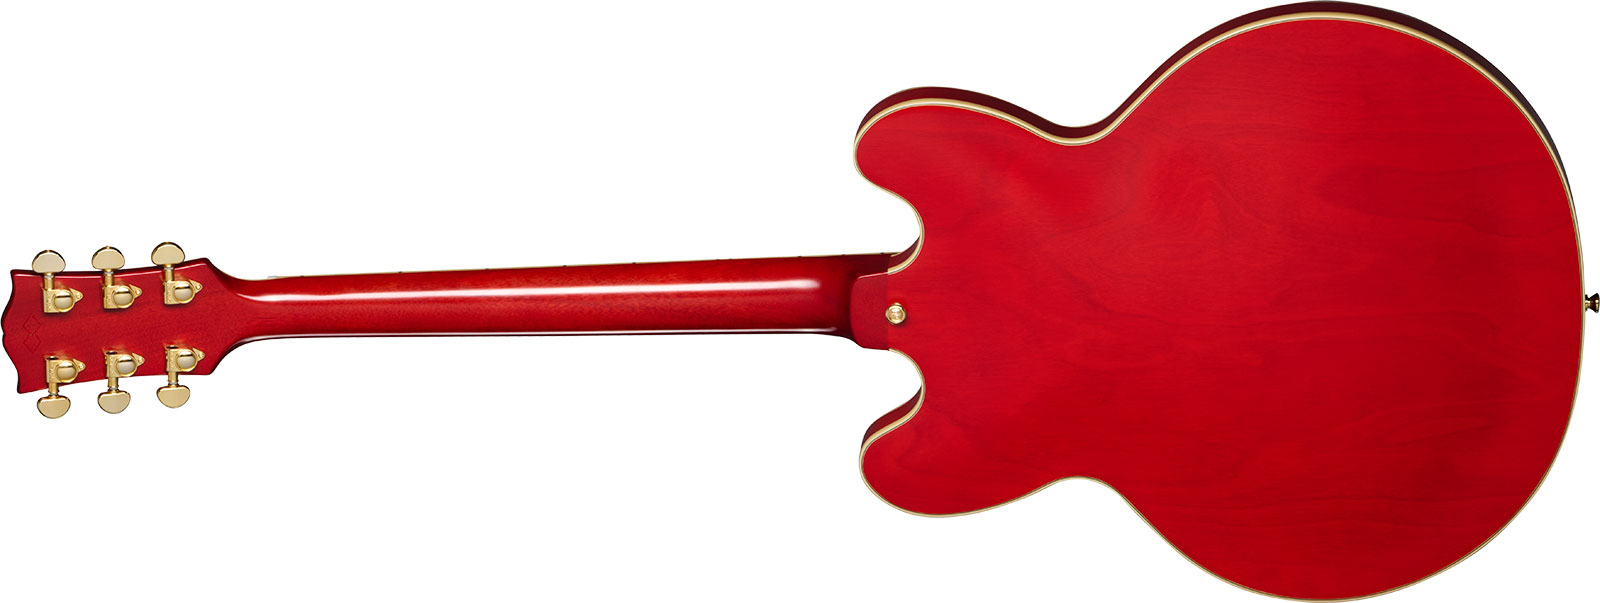 Epiphone Es355 1959 Inspired By 2h Gibson Ht Eb - Vos Cherry Red - Guitarra eléctrica semi caja - Variation 1